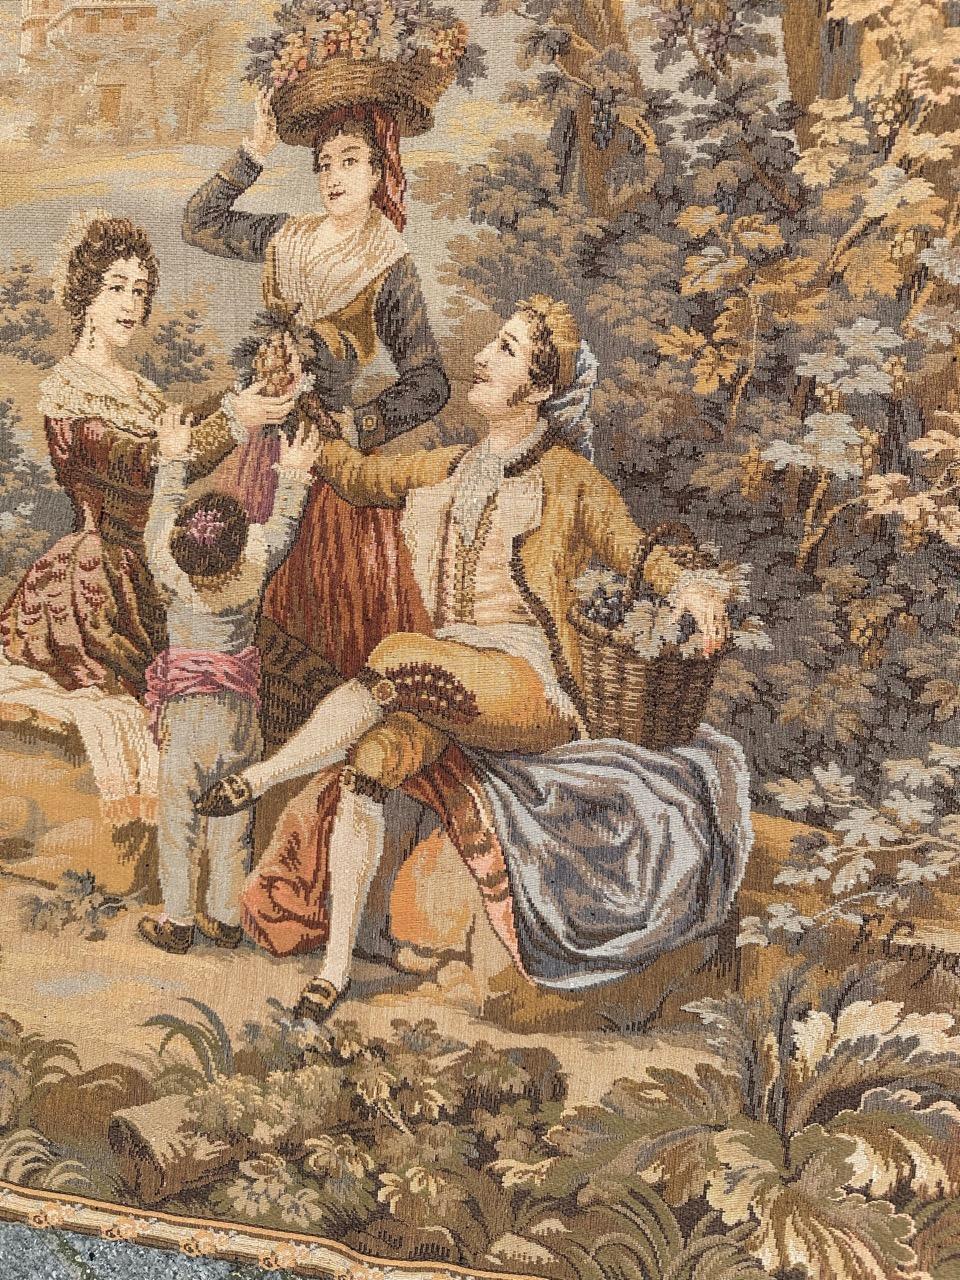 Very pretty mid century french Aubusson style tapestry with beautiful design from the painter « Francisco de Goya (1775-1792) for the royal manufactury of Tapestry »

Tapestry crafted using the GOBELIN stitch on a JACQUART loom for JEAN LAURENT